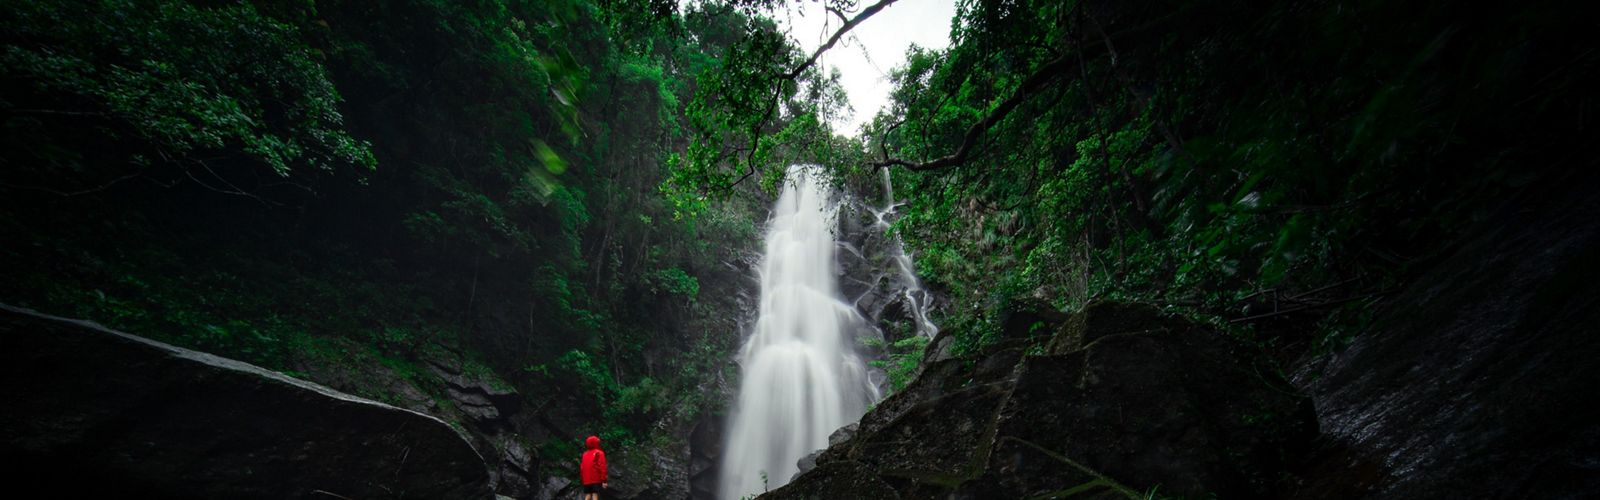 A person stands in front of a magnificent waterfall.